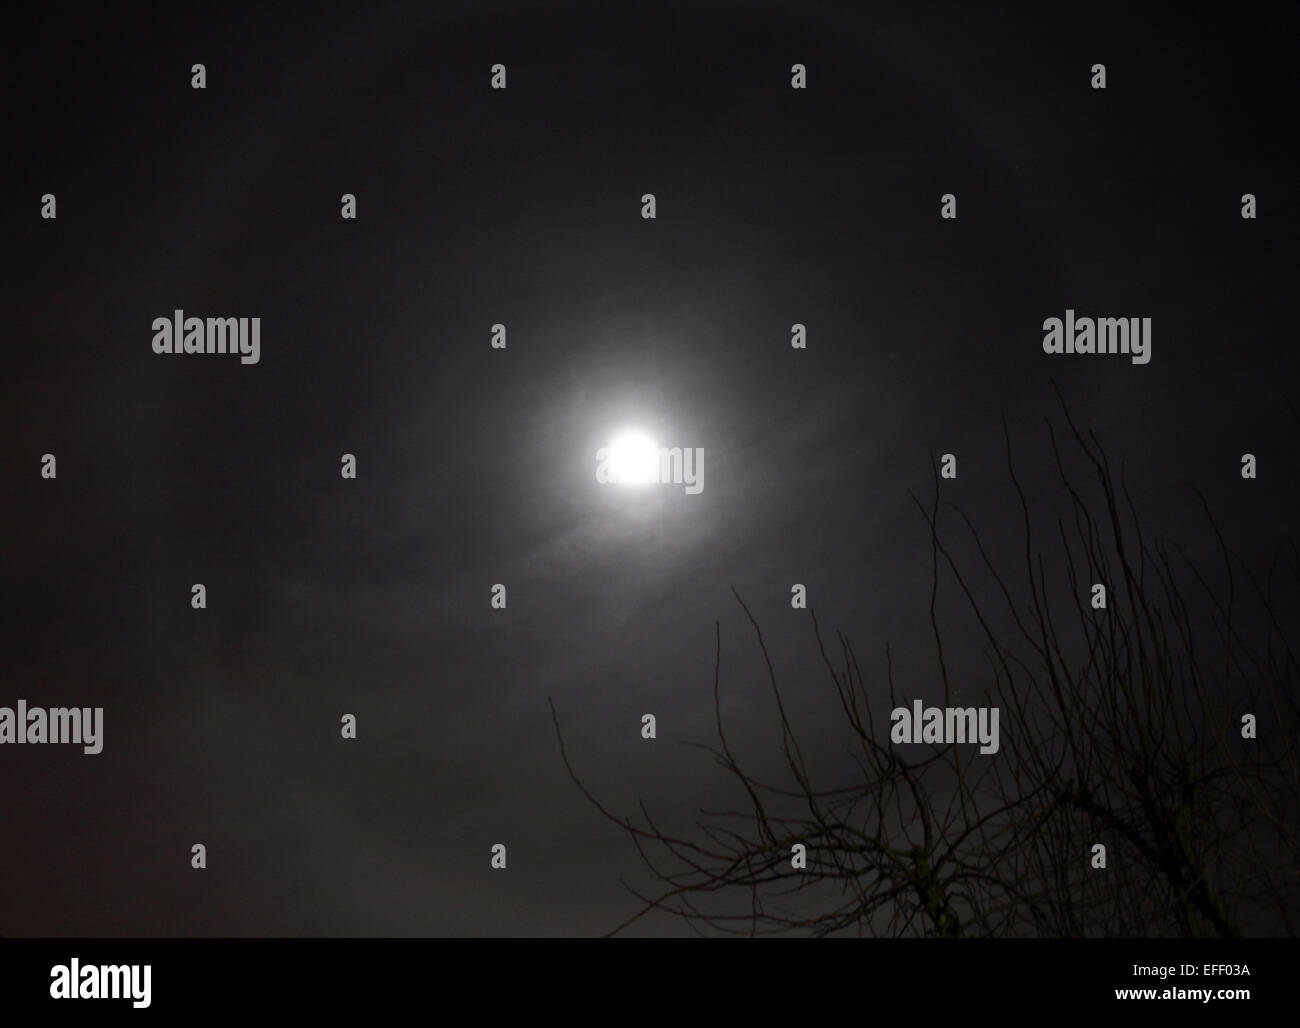 Epsom, Surrey, UK. 2nd February 2015. UK Weather: This rare phenonemon of seeing a halo around the moon happens when thin cirrus clouds are drifting high up in the sky. Tiny ice crystals in Earth’s atmosphere cause the halos by refracting and reflecting the light. Credit:  Julia Gavin UK/Alamy Live News Stock Photo